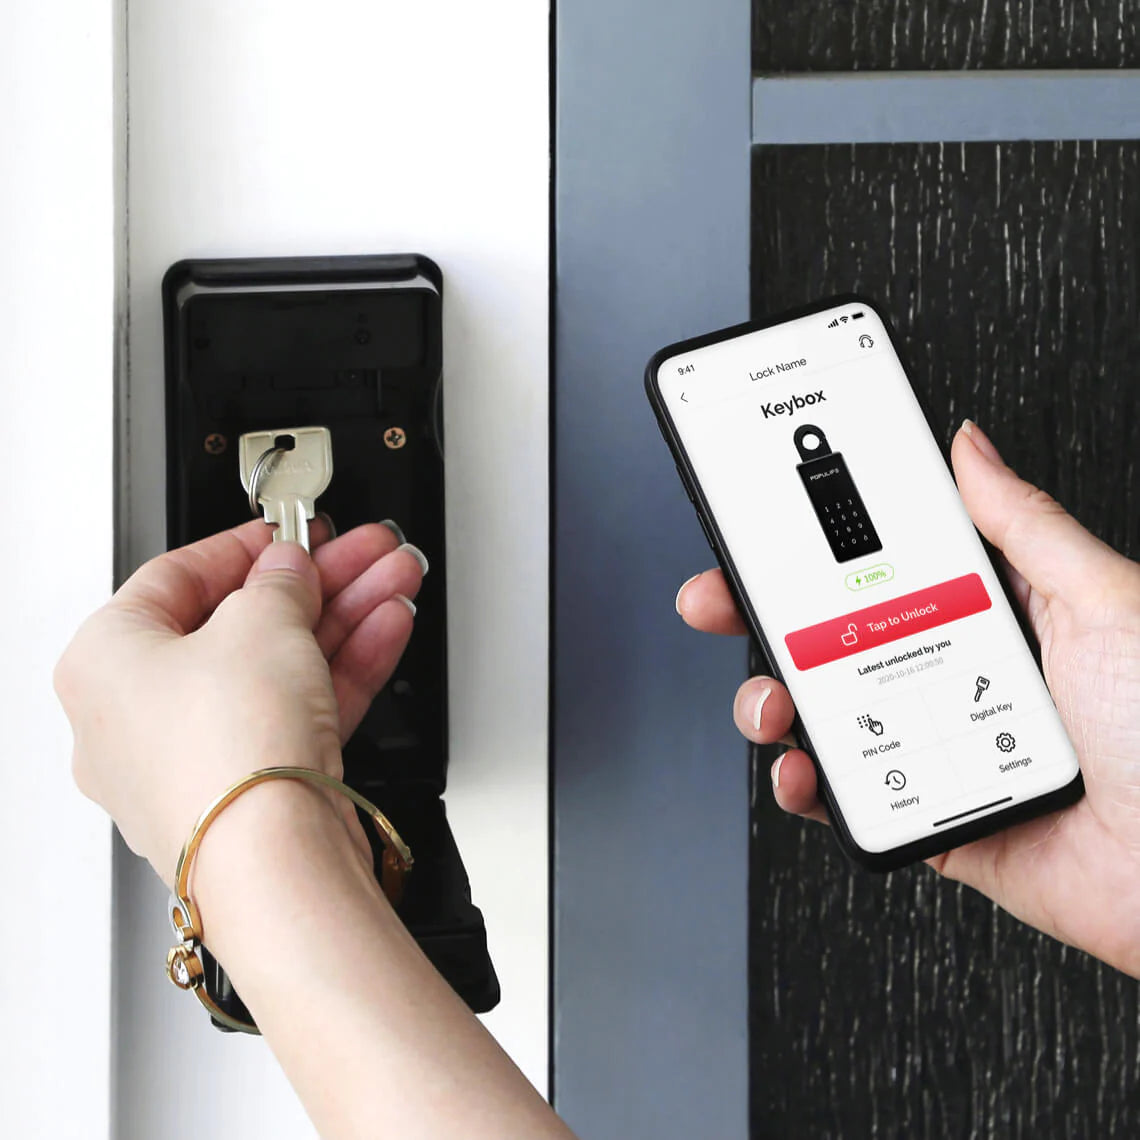 Populife Smart Keybox in Japan, crowdfunded nearly 1.6 million yen within 72 hours 